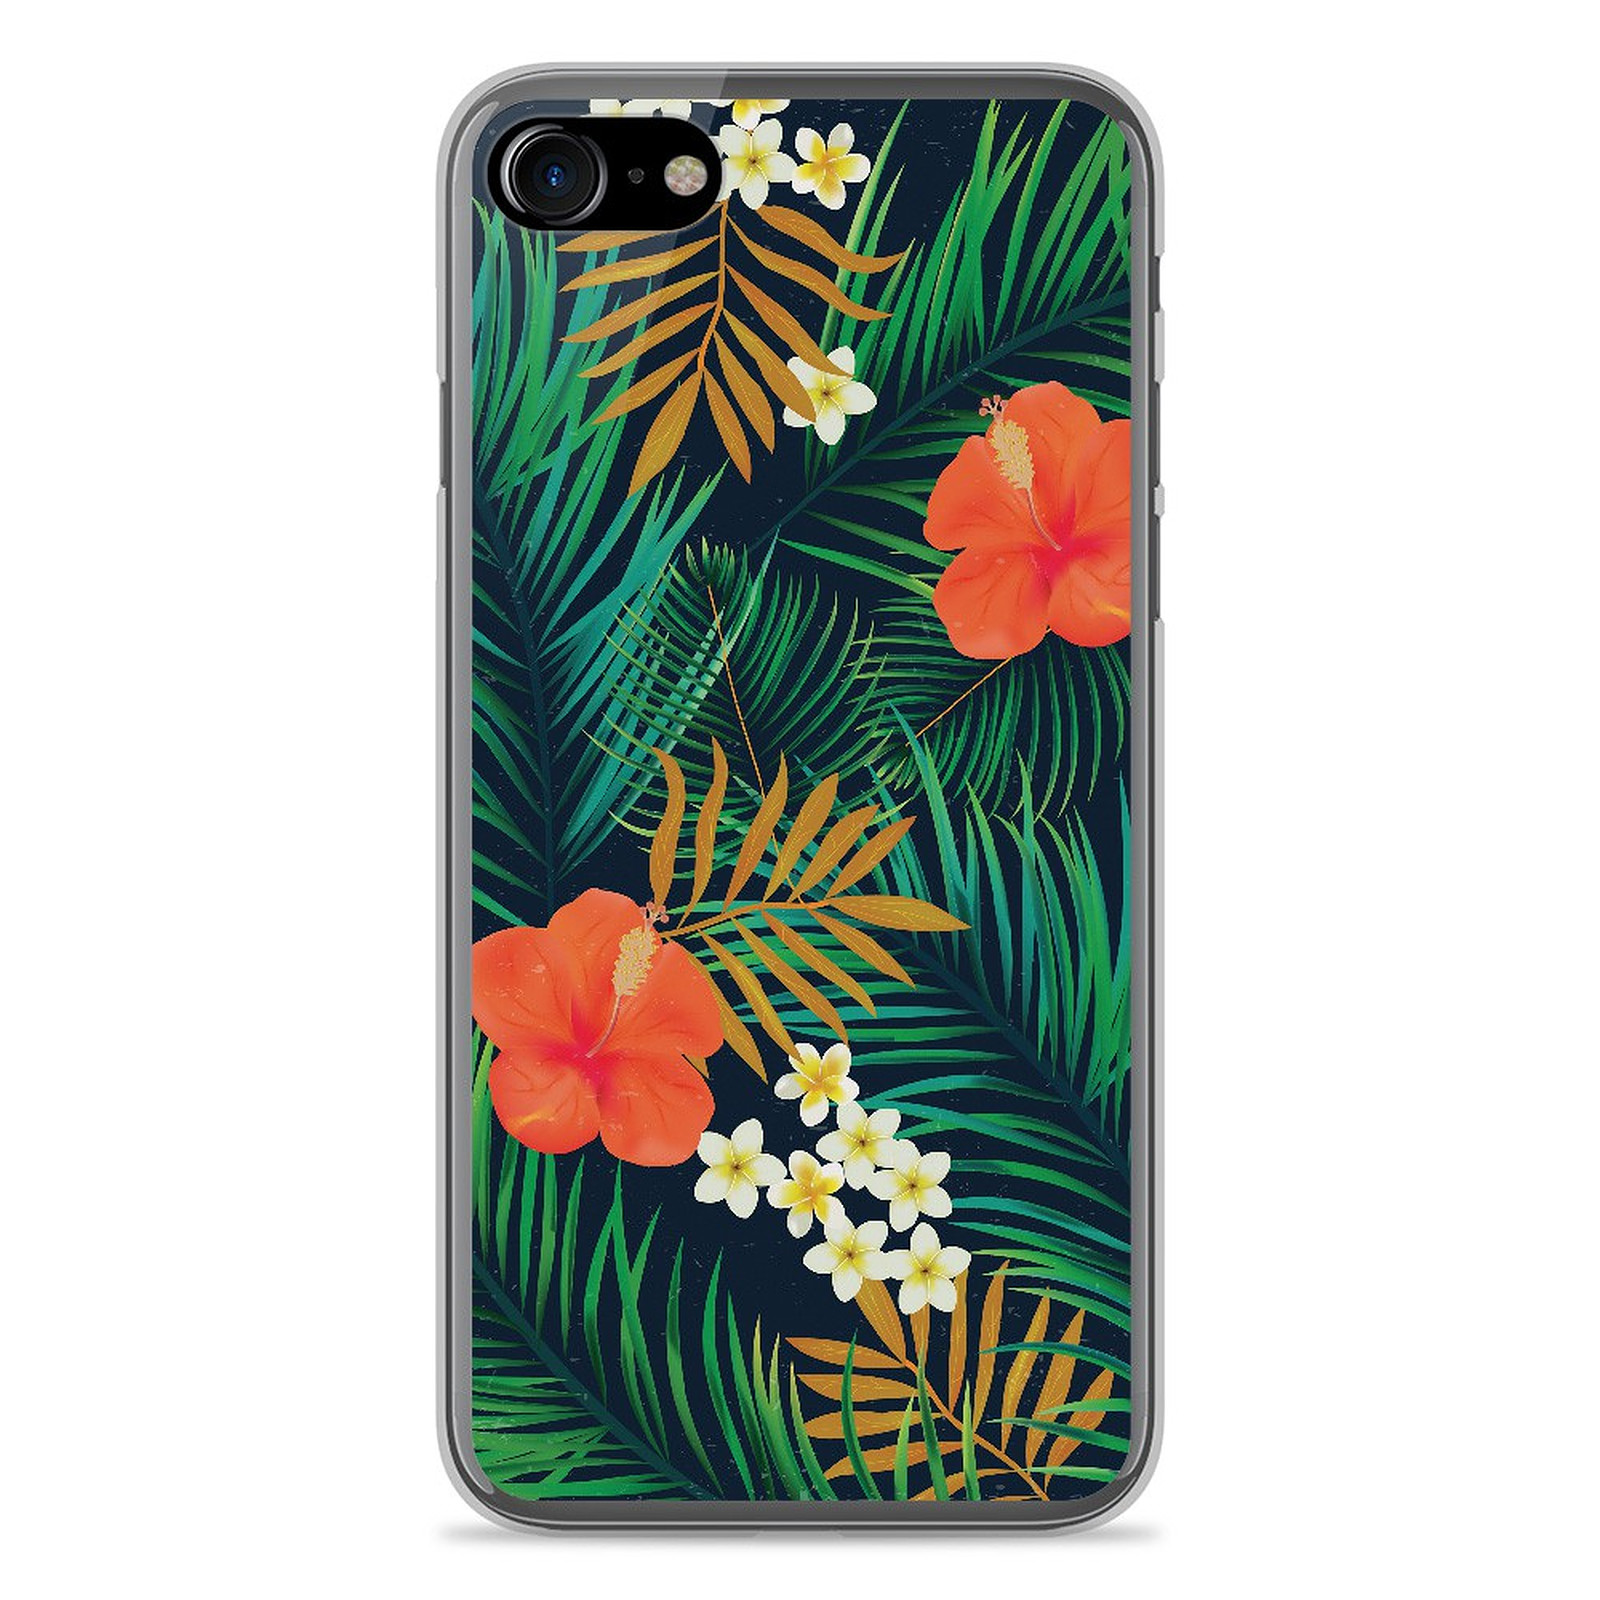 1001 Coques Coque silicone gel Apple IPhone 8 motif Tropical - Coque telephone 1001Coques